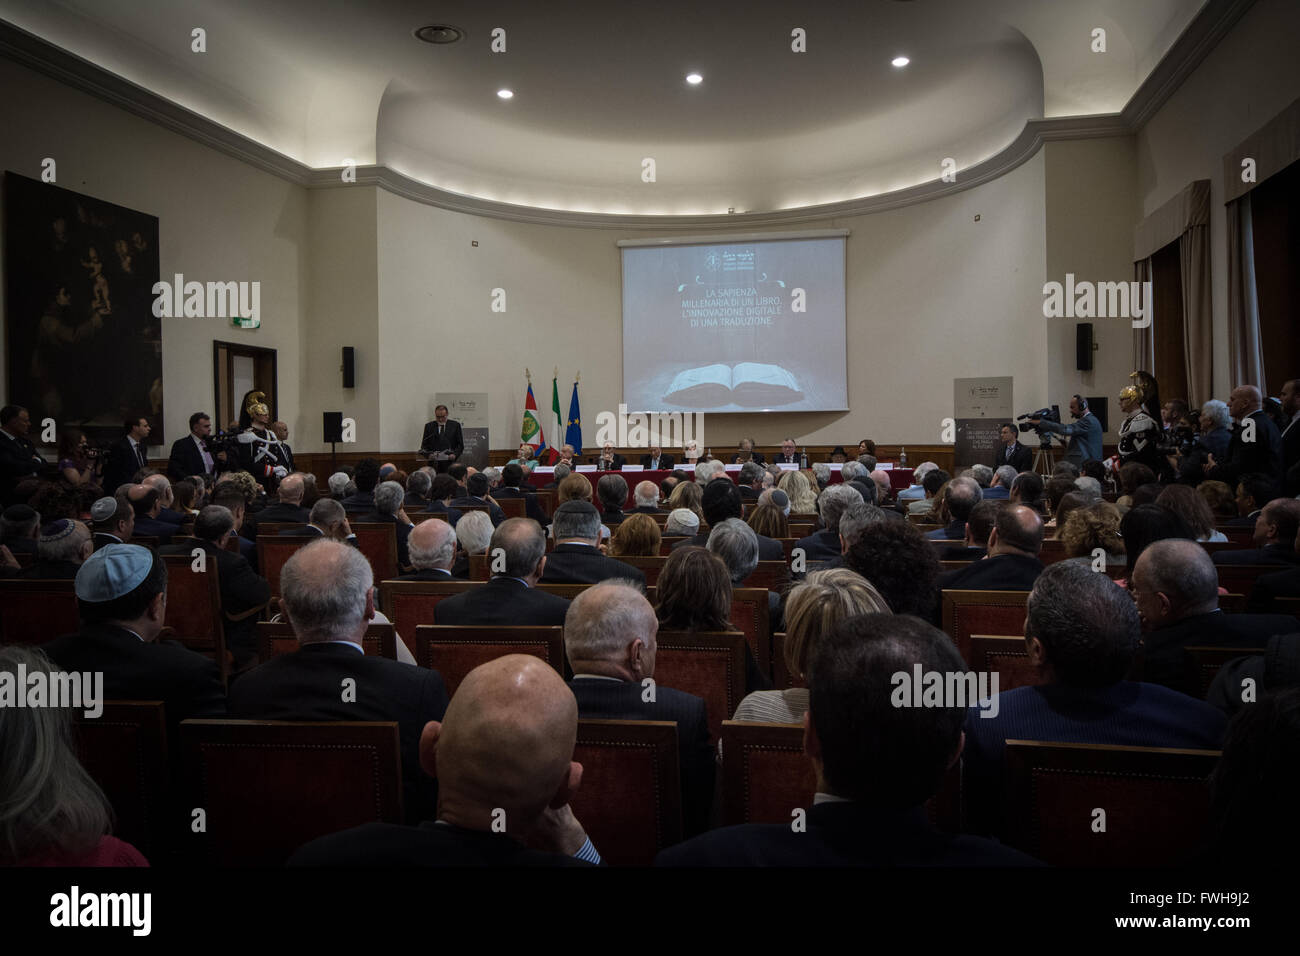 Rome, Italy. 05th Apr, 2016. The first copy of the translation in Italian of the Rosh Hashanah Treaty, the first volume of the Talmud, the fundamental text of Jewish tradition, was delivered to the President of the Republic Sergio Mattarella, at a presentation ceremony held at the Auditorium of Villa Farnesina, hosted by Accademia dei Lincei. © Andrea Ronchini/Pacific Press/Alamy Live News Stock Photo